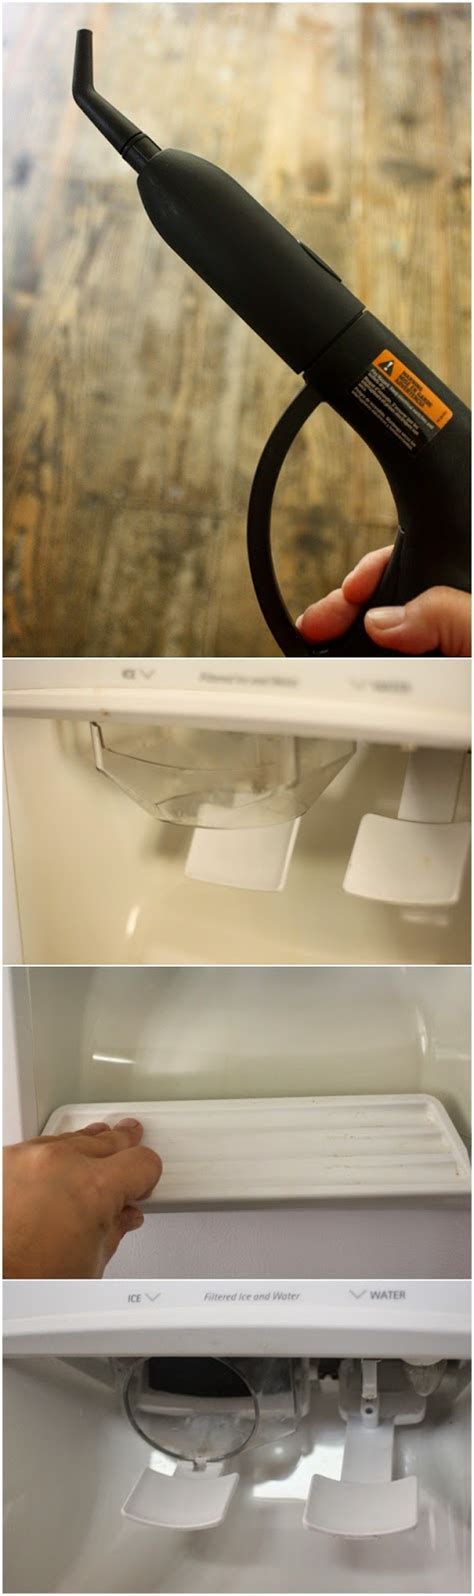 clean  ice maker   refrigerator diy craft projects